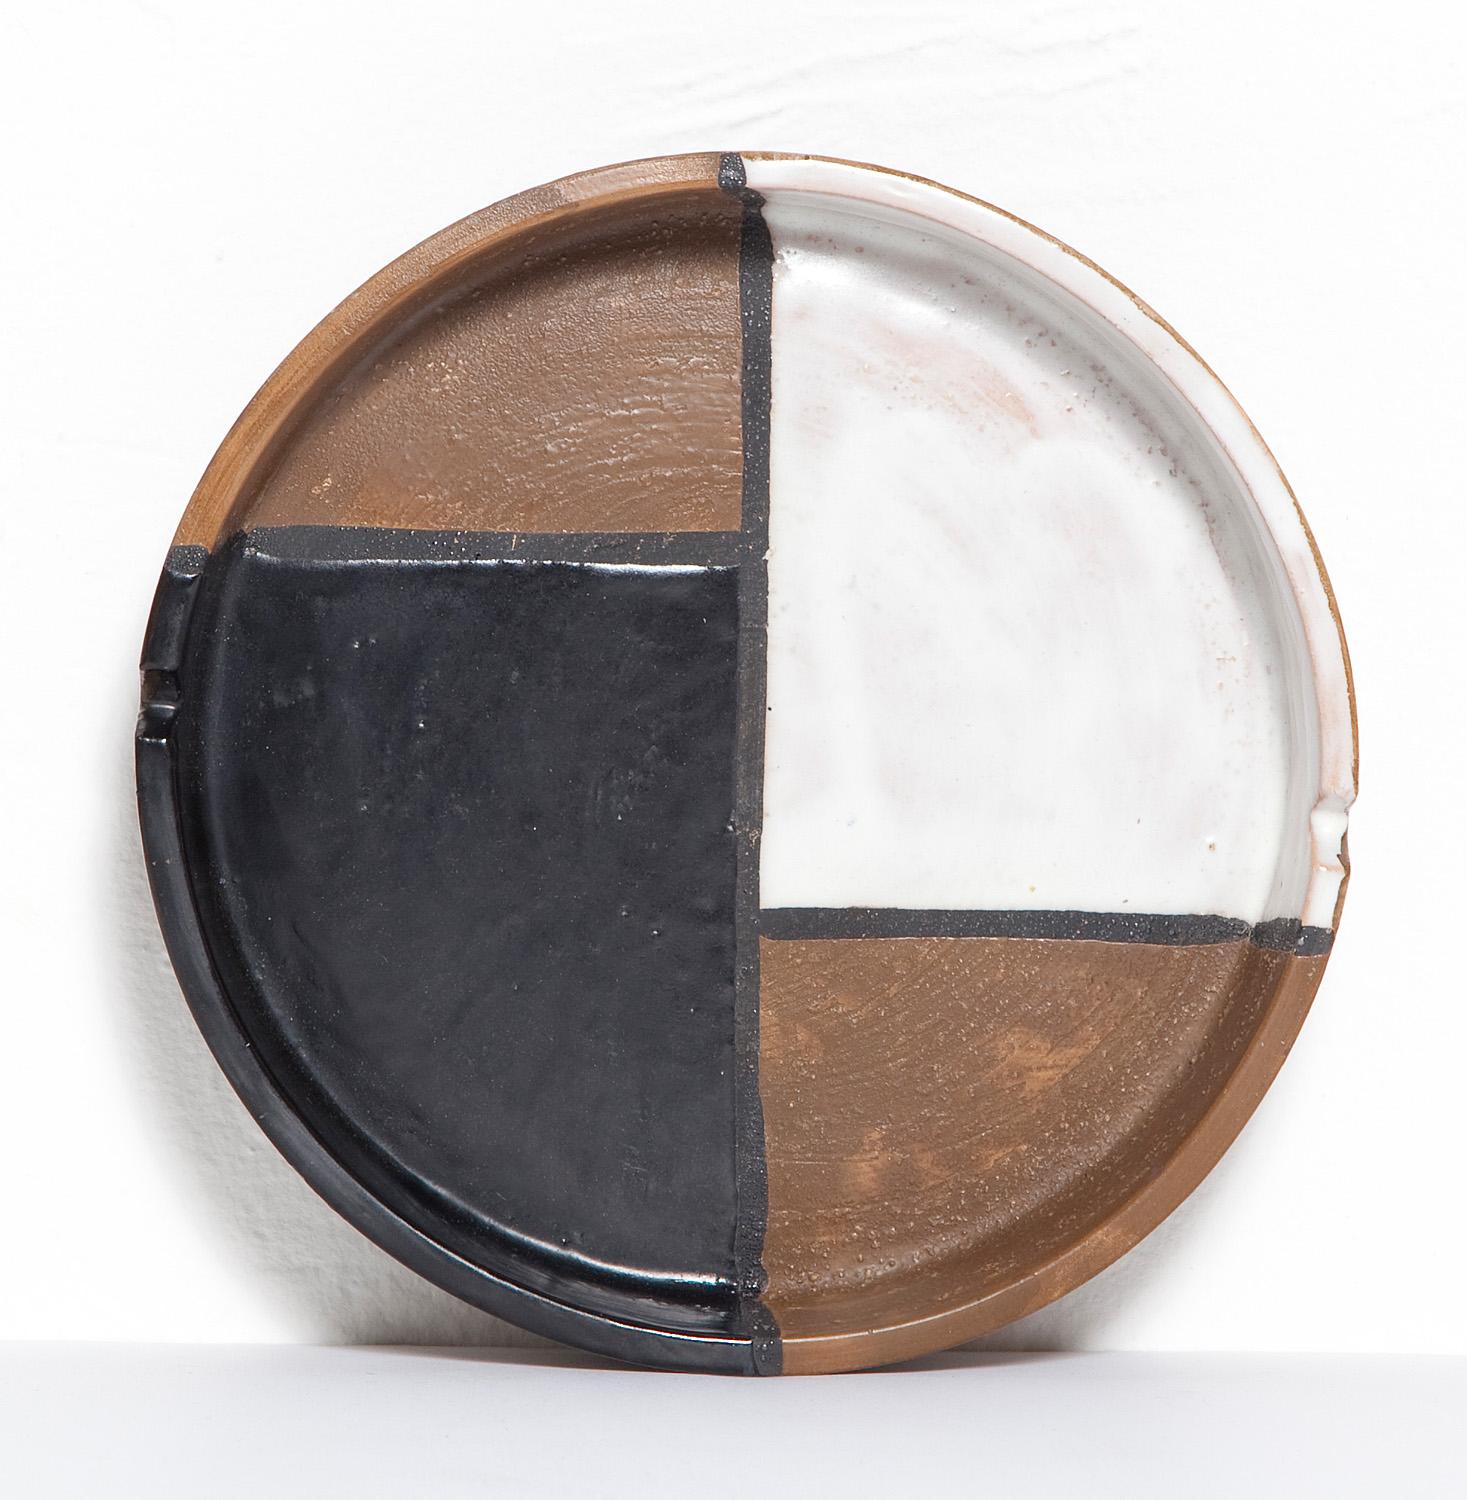 Mondrian-inspired black, white, and brown ashtray by Bitossi for Raymor, circa 1965. Marked 